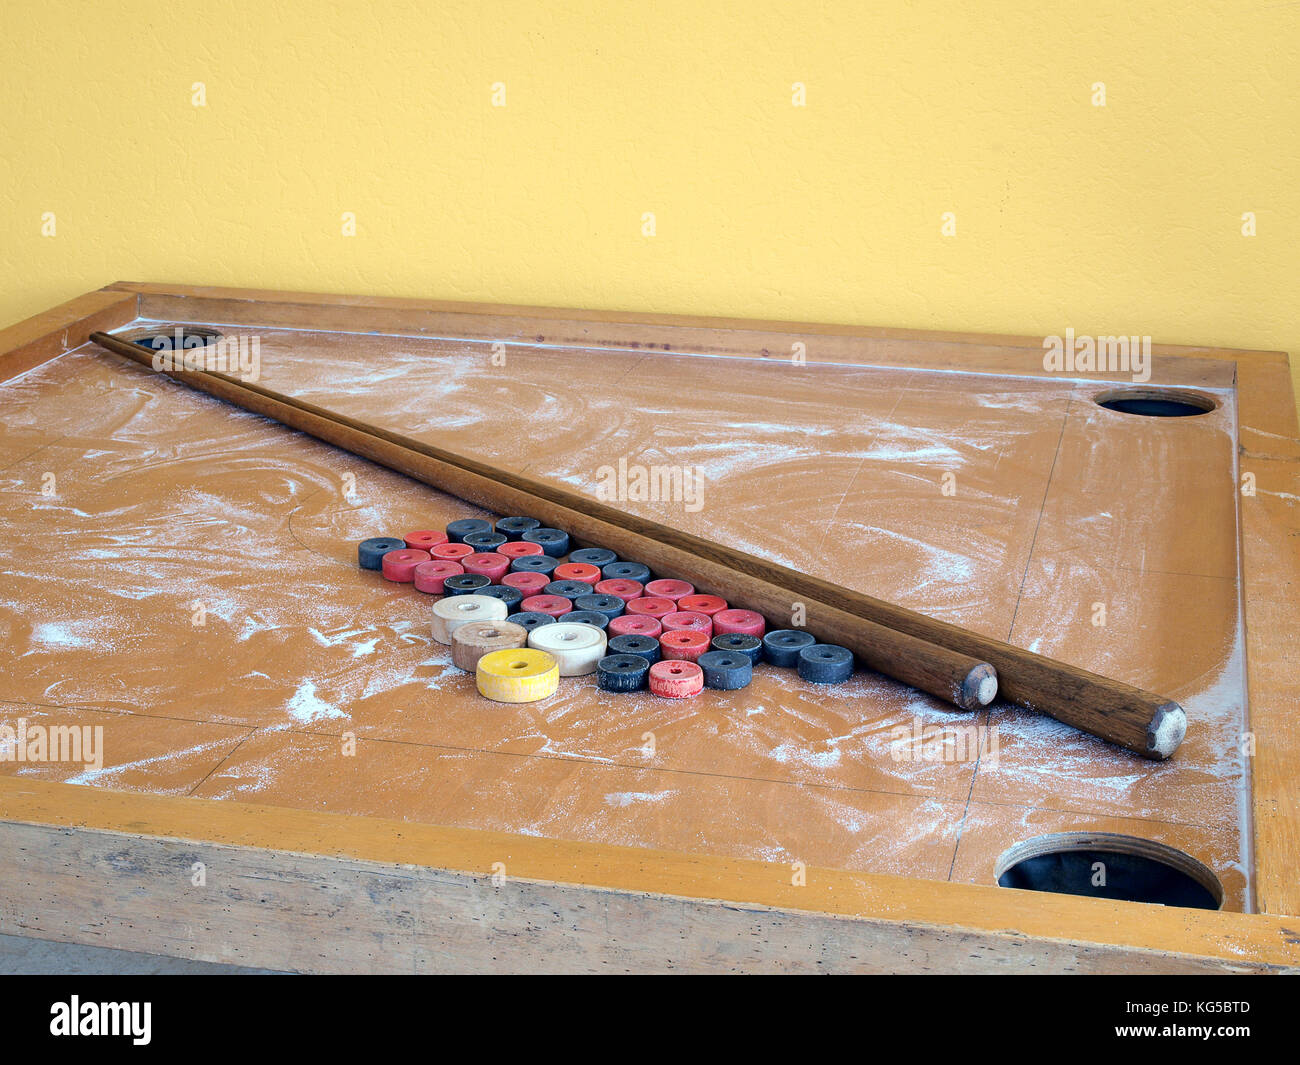 Novuss game table with bones and cues dusted with boric acid powder Stock Photo